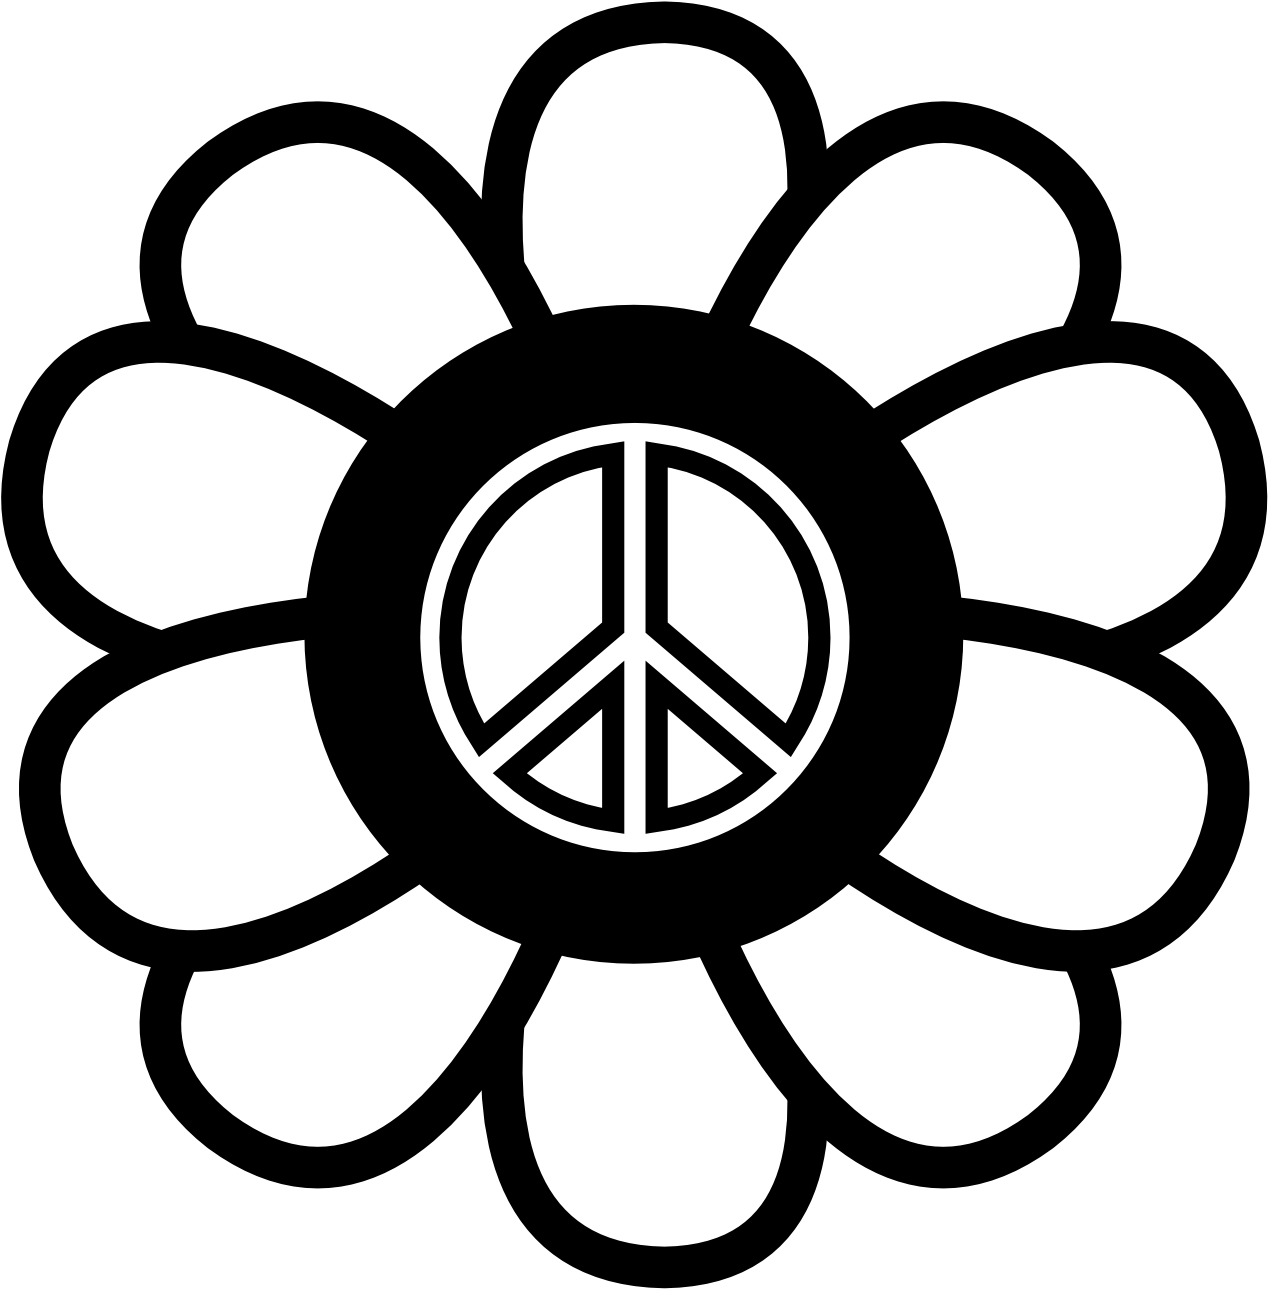 Floral Peace Symbol Graphic PNG image